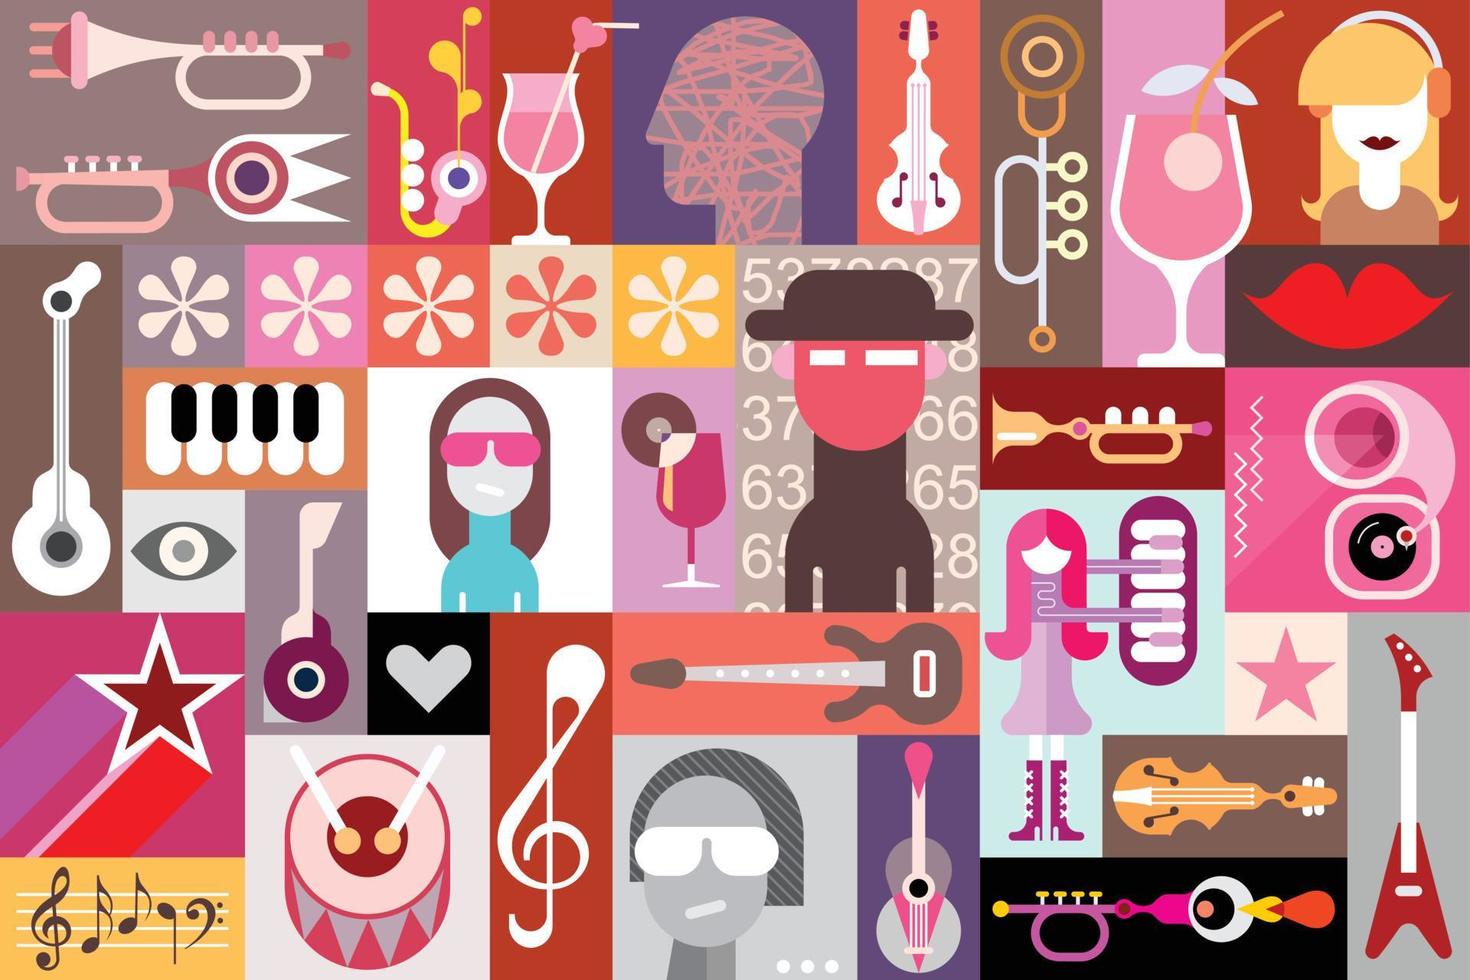 Music People Collage vector